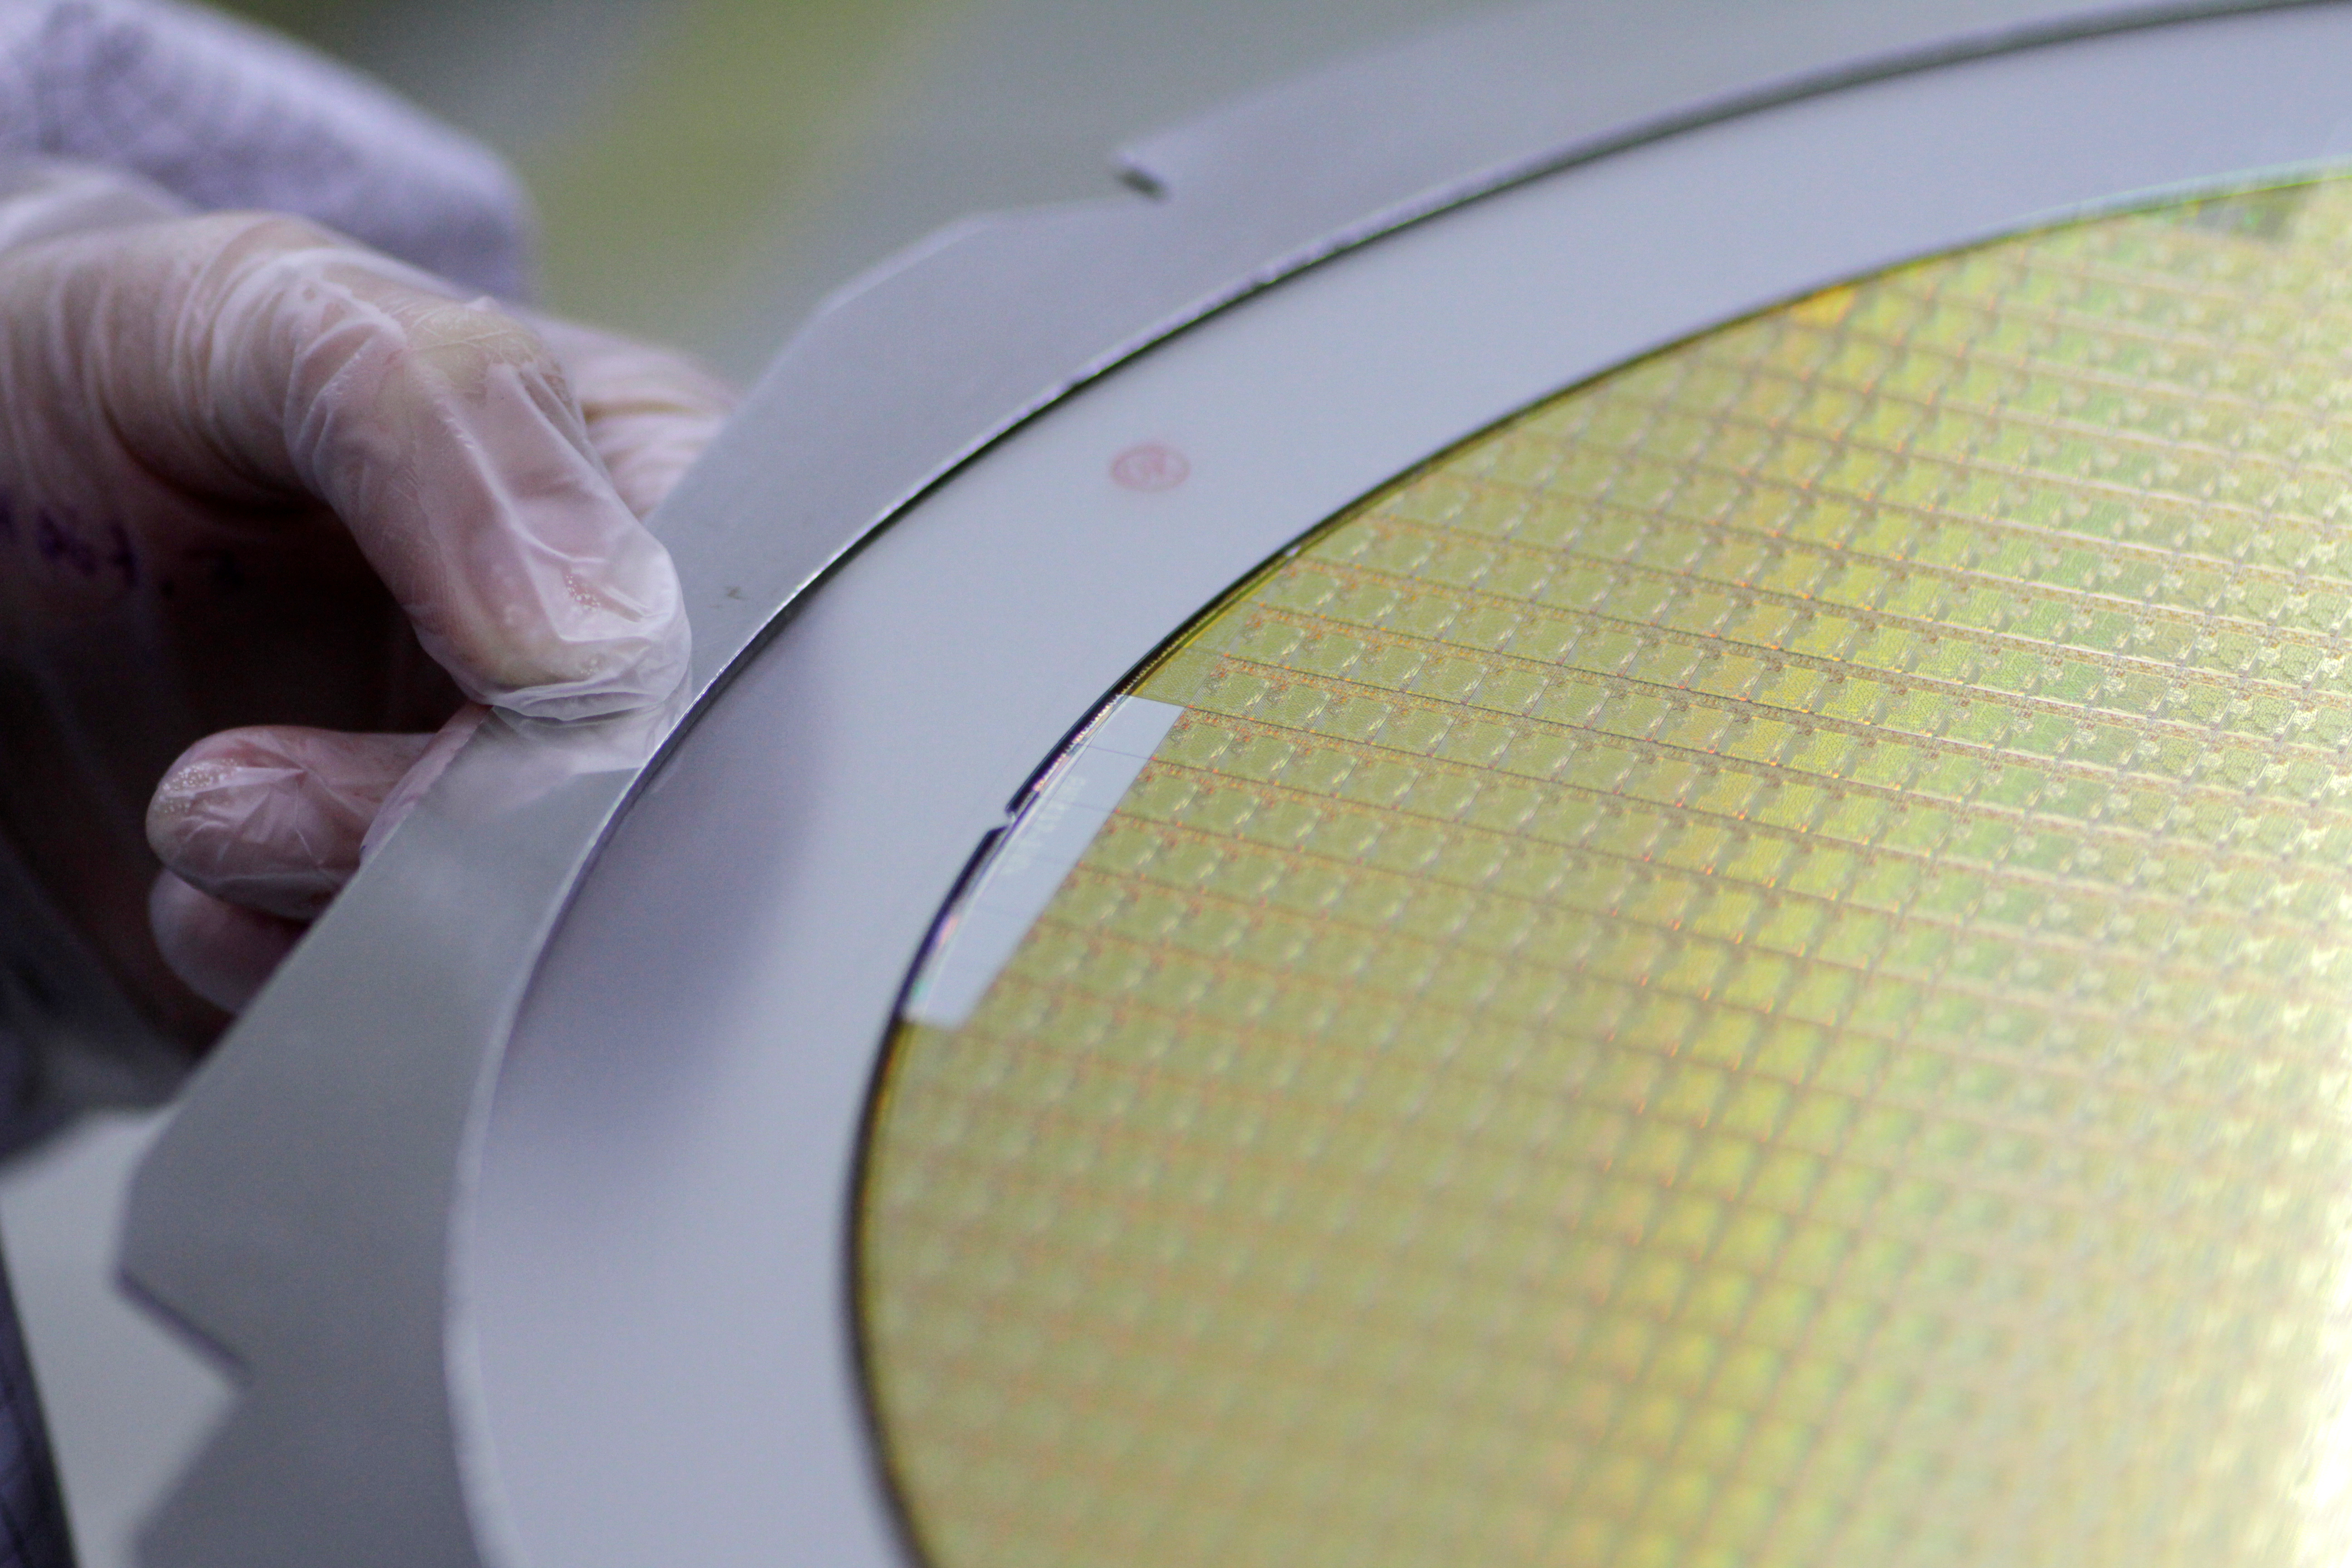 A worker checks a wafer chip in the clean room at the UTAC plant in Singapore